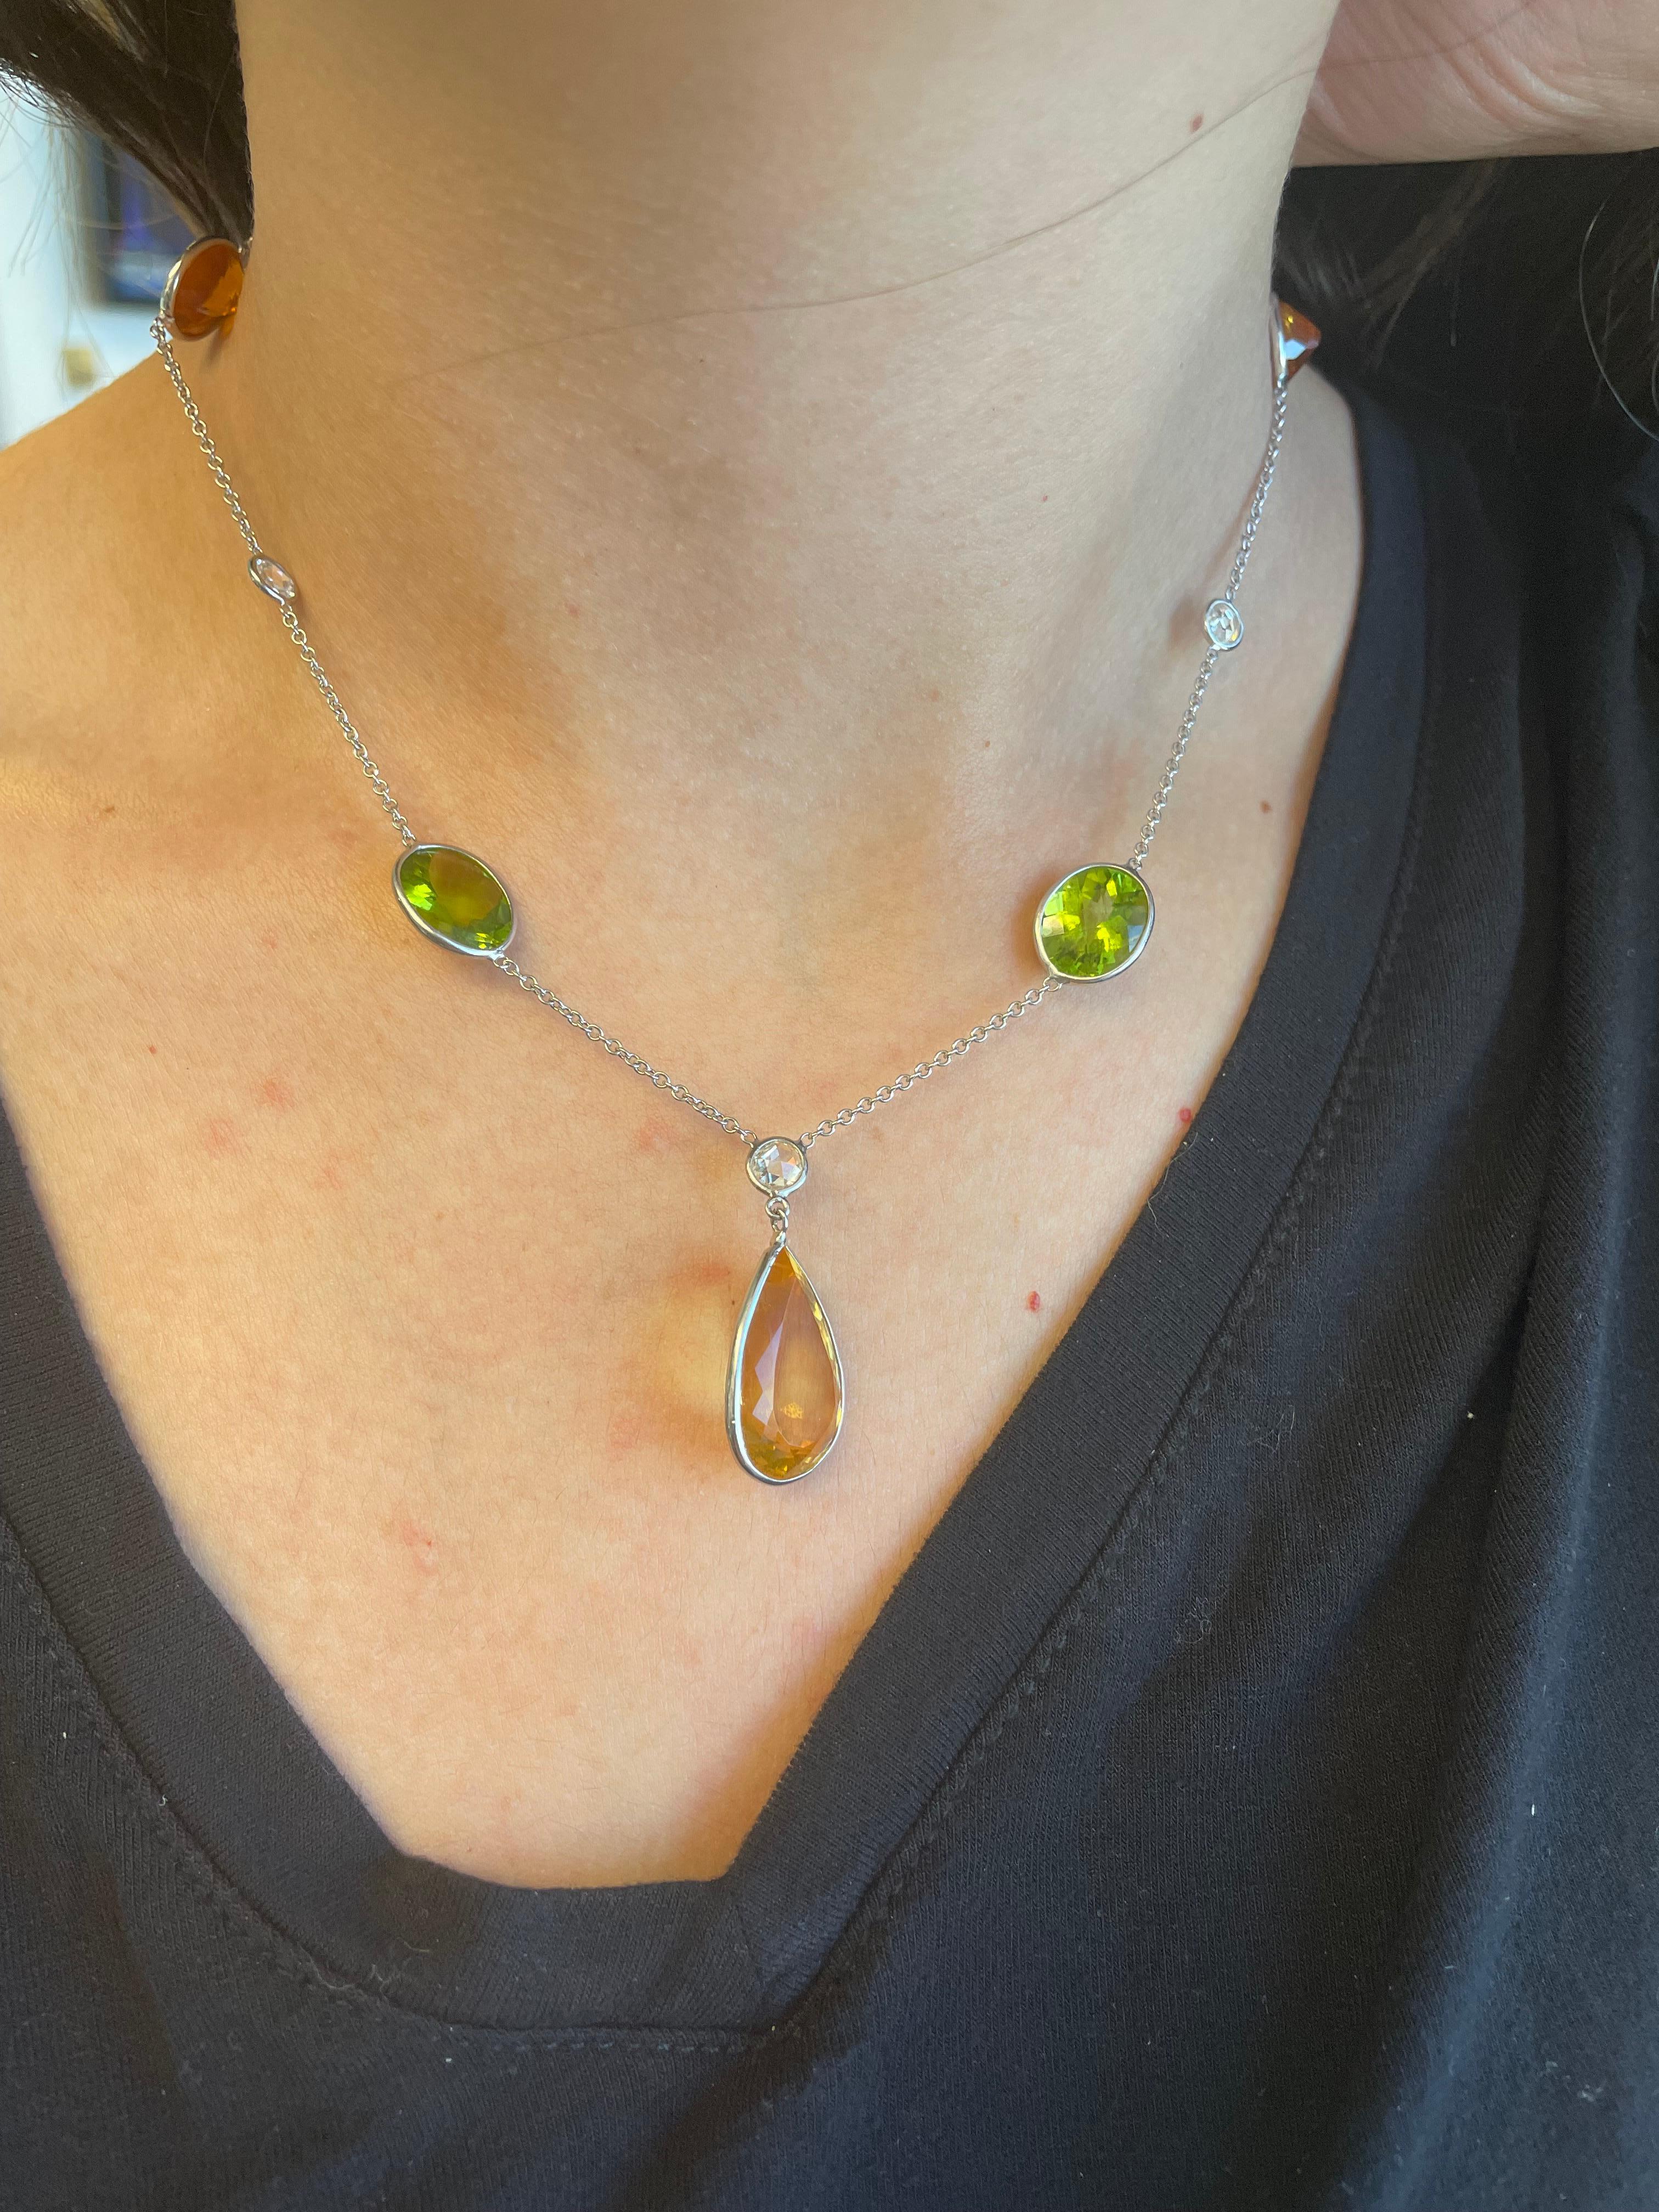 Beautiful mixed colored stone drop necklace.
30.49 carats total gemstone weight.
3 citrine quartz, 1 pear shape, 2 rounds, 20.15 carats. 2 rose cut peridot, 9.25 carats. 3 round brilliant diamonds, 1.09 carats. Approximately H/I color and SI